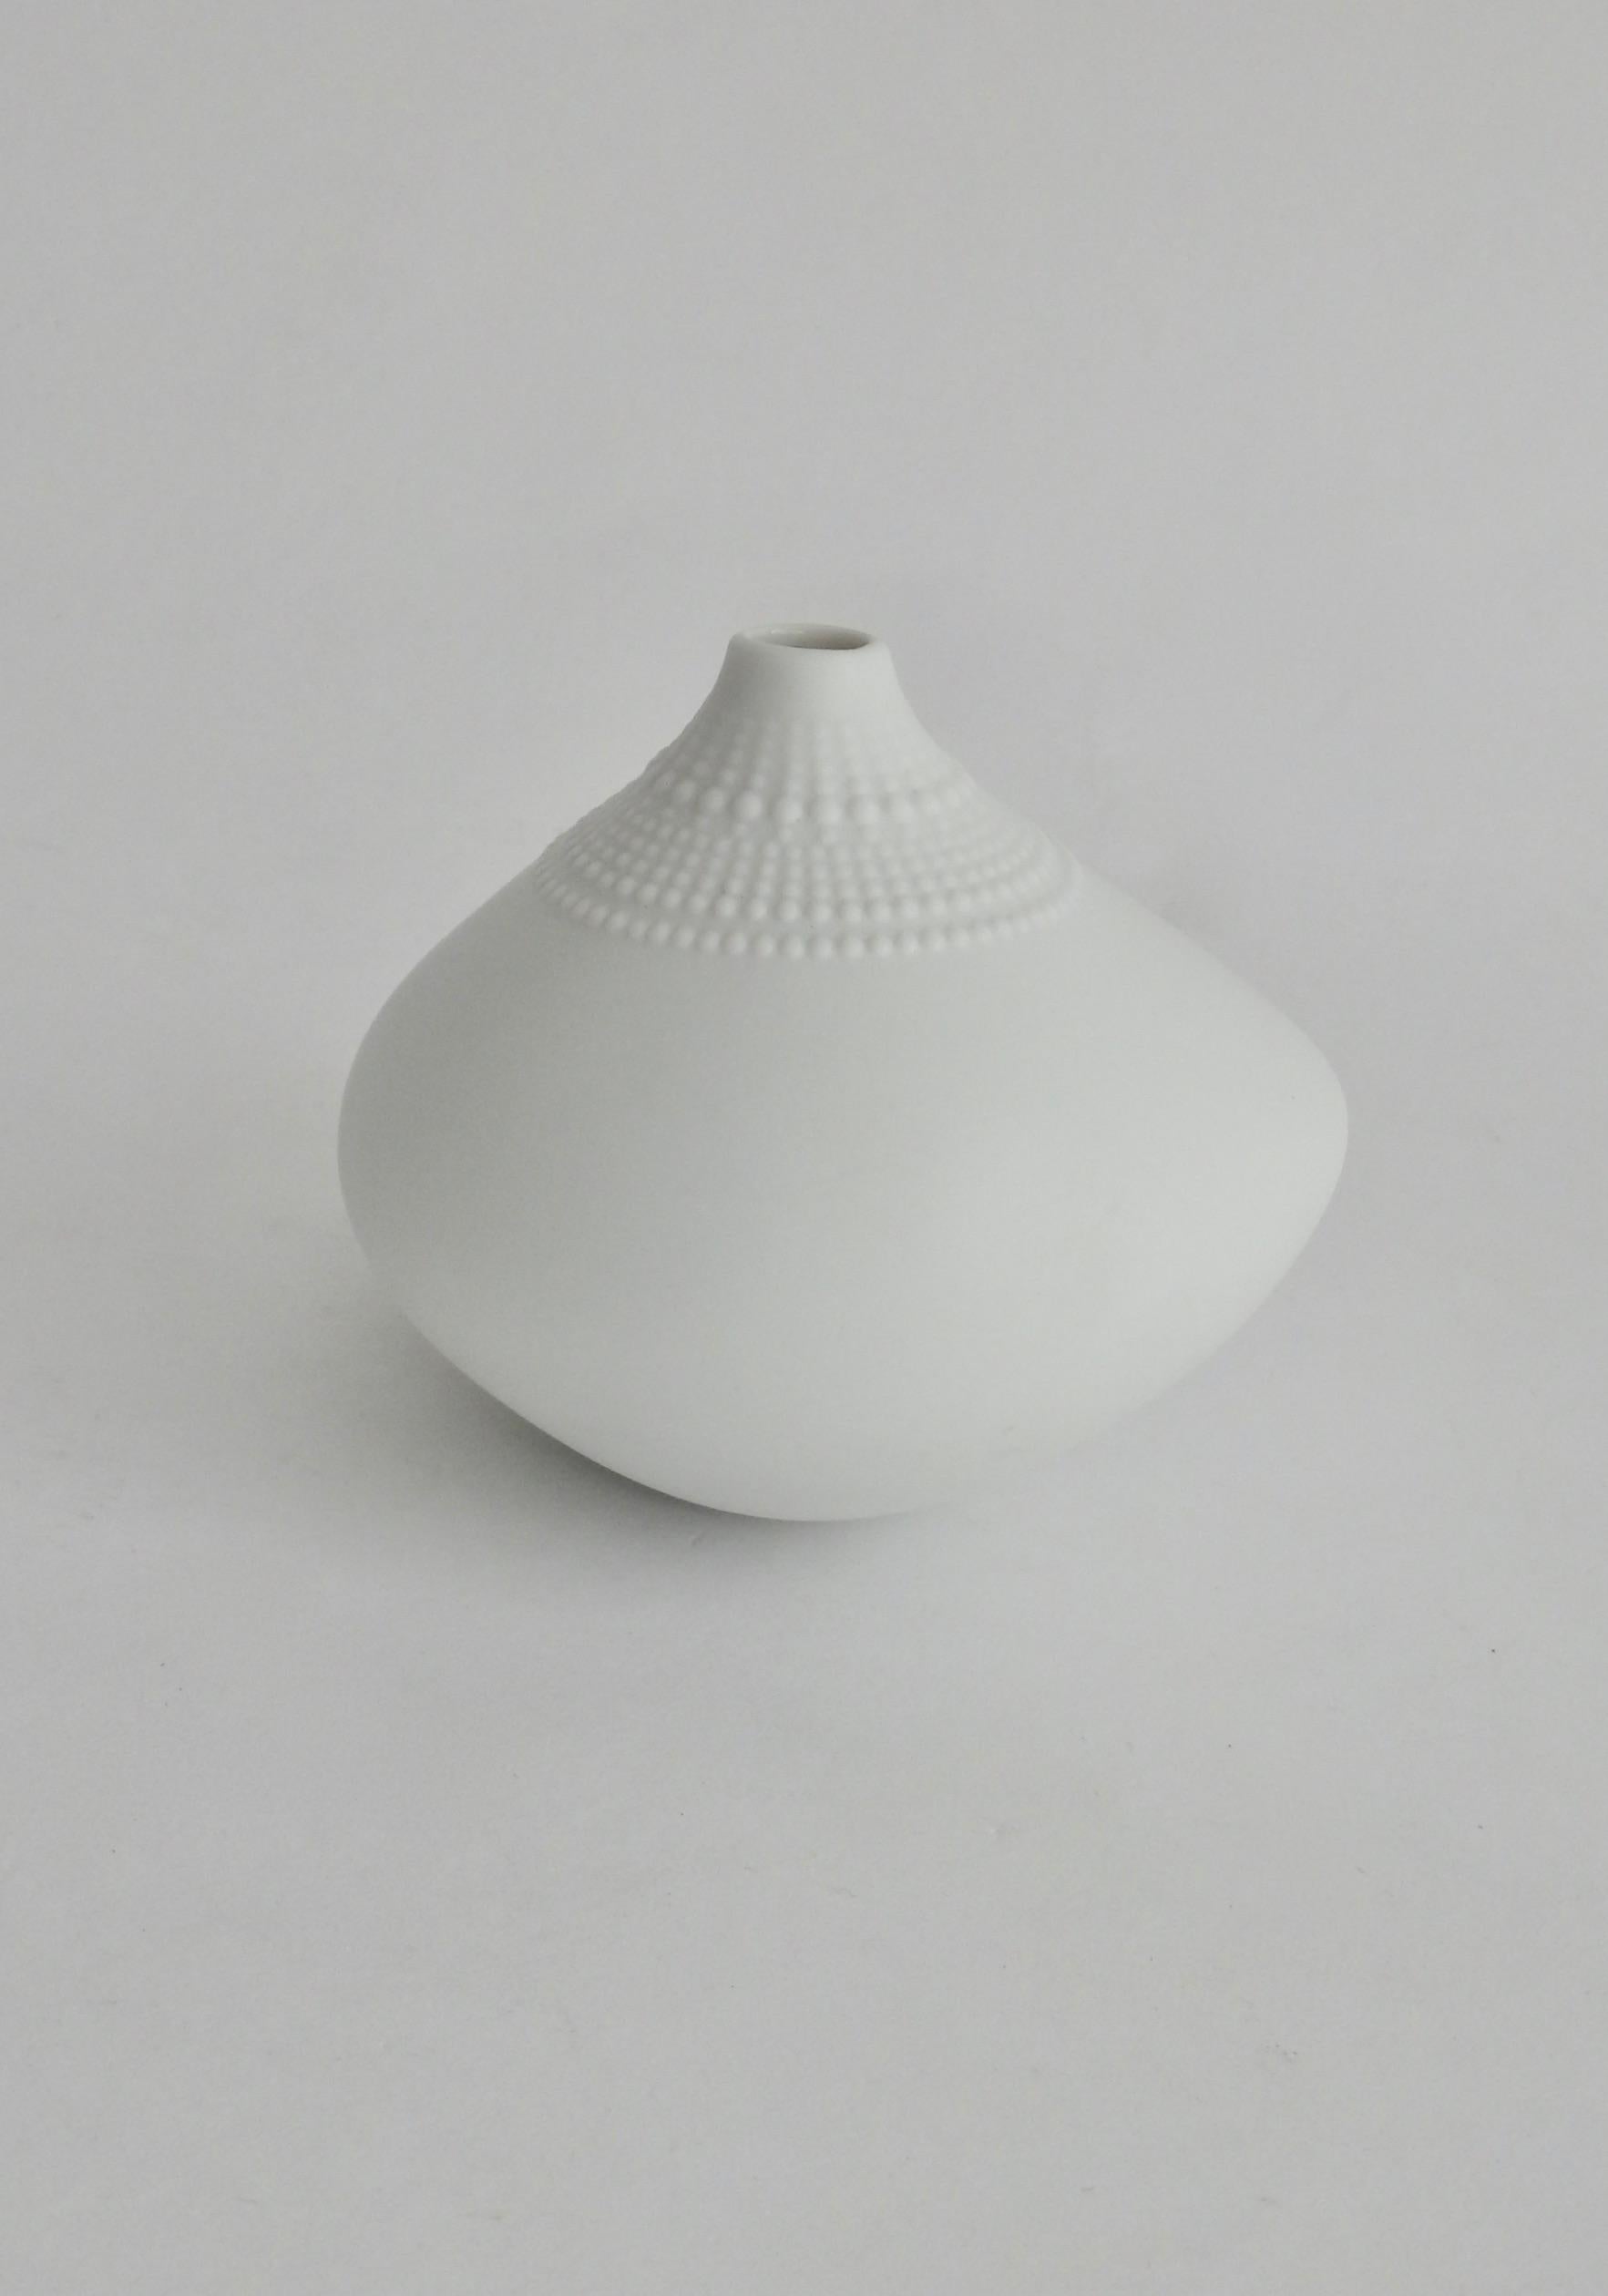 Biomprphic form Pollo vase in matte white porcelain designed by Tapio Wirkkala of Finland. Produced by and Marked Rosenthal Studio Line.